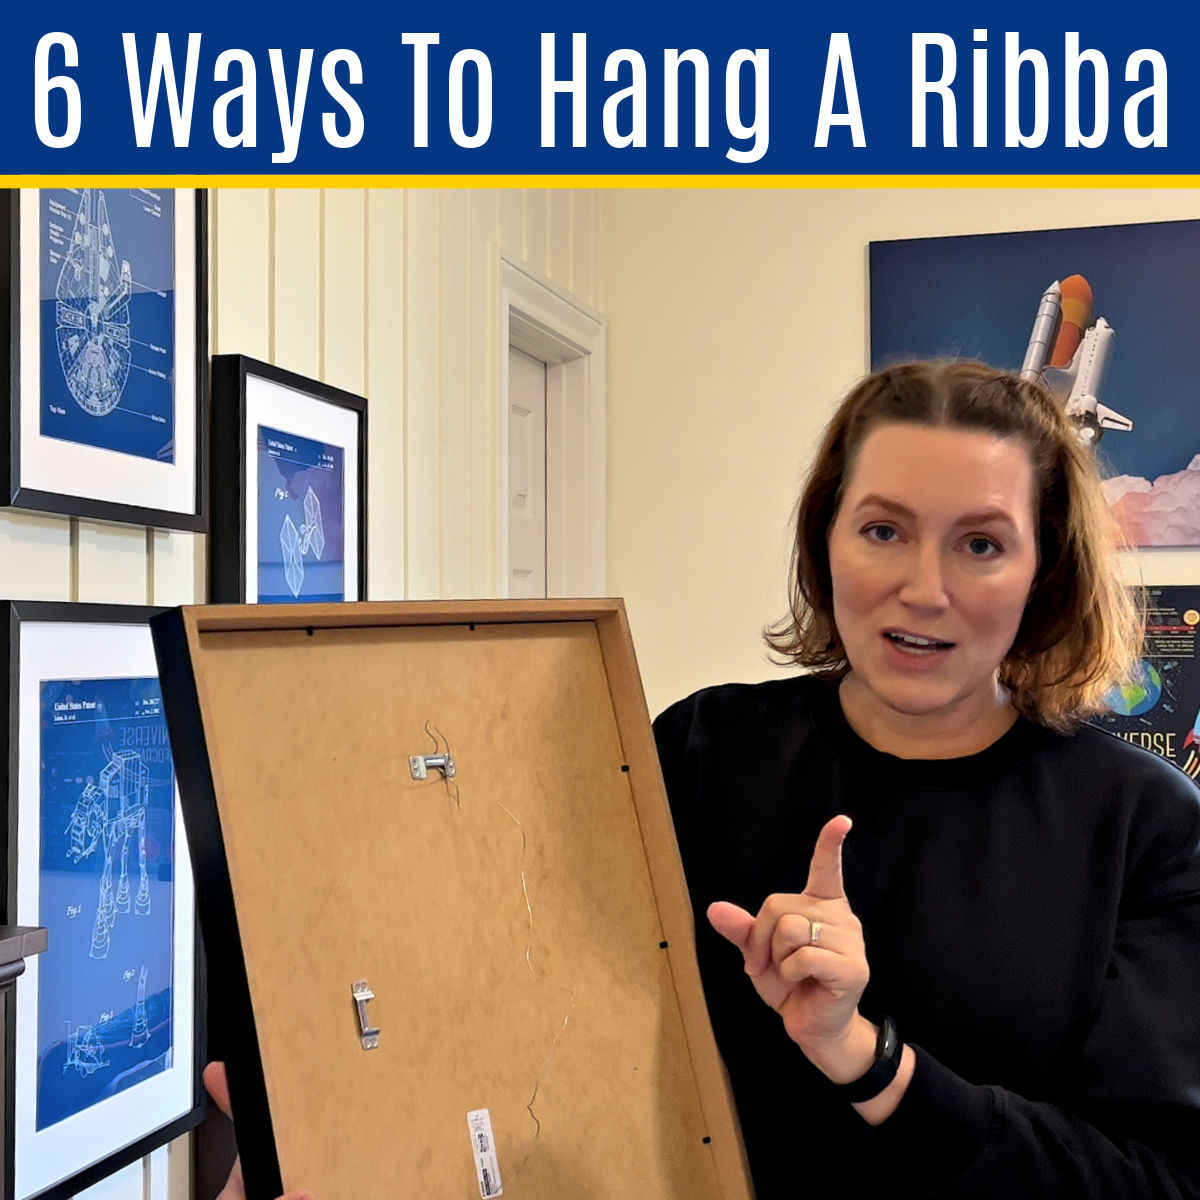 How To Hang IKEA Ribba Picture Frames: 6 Easy Ways With Steps & Video -  Abbotts At Home